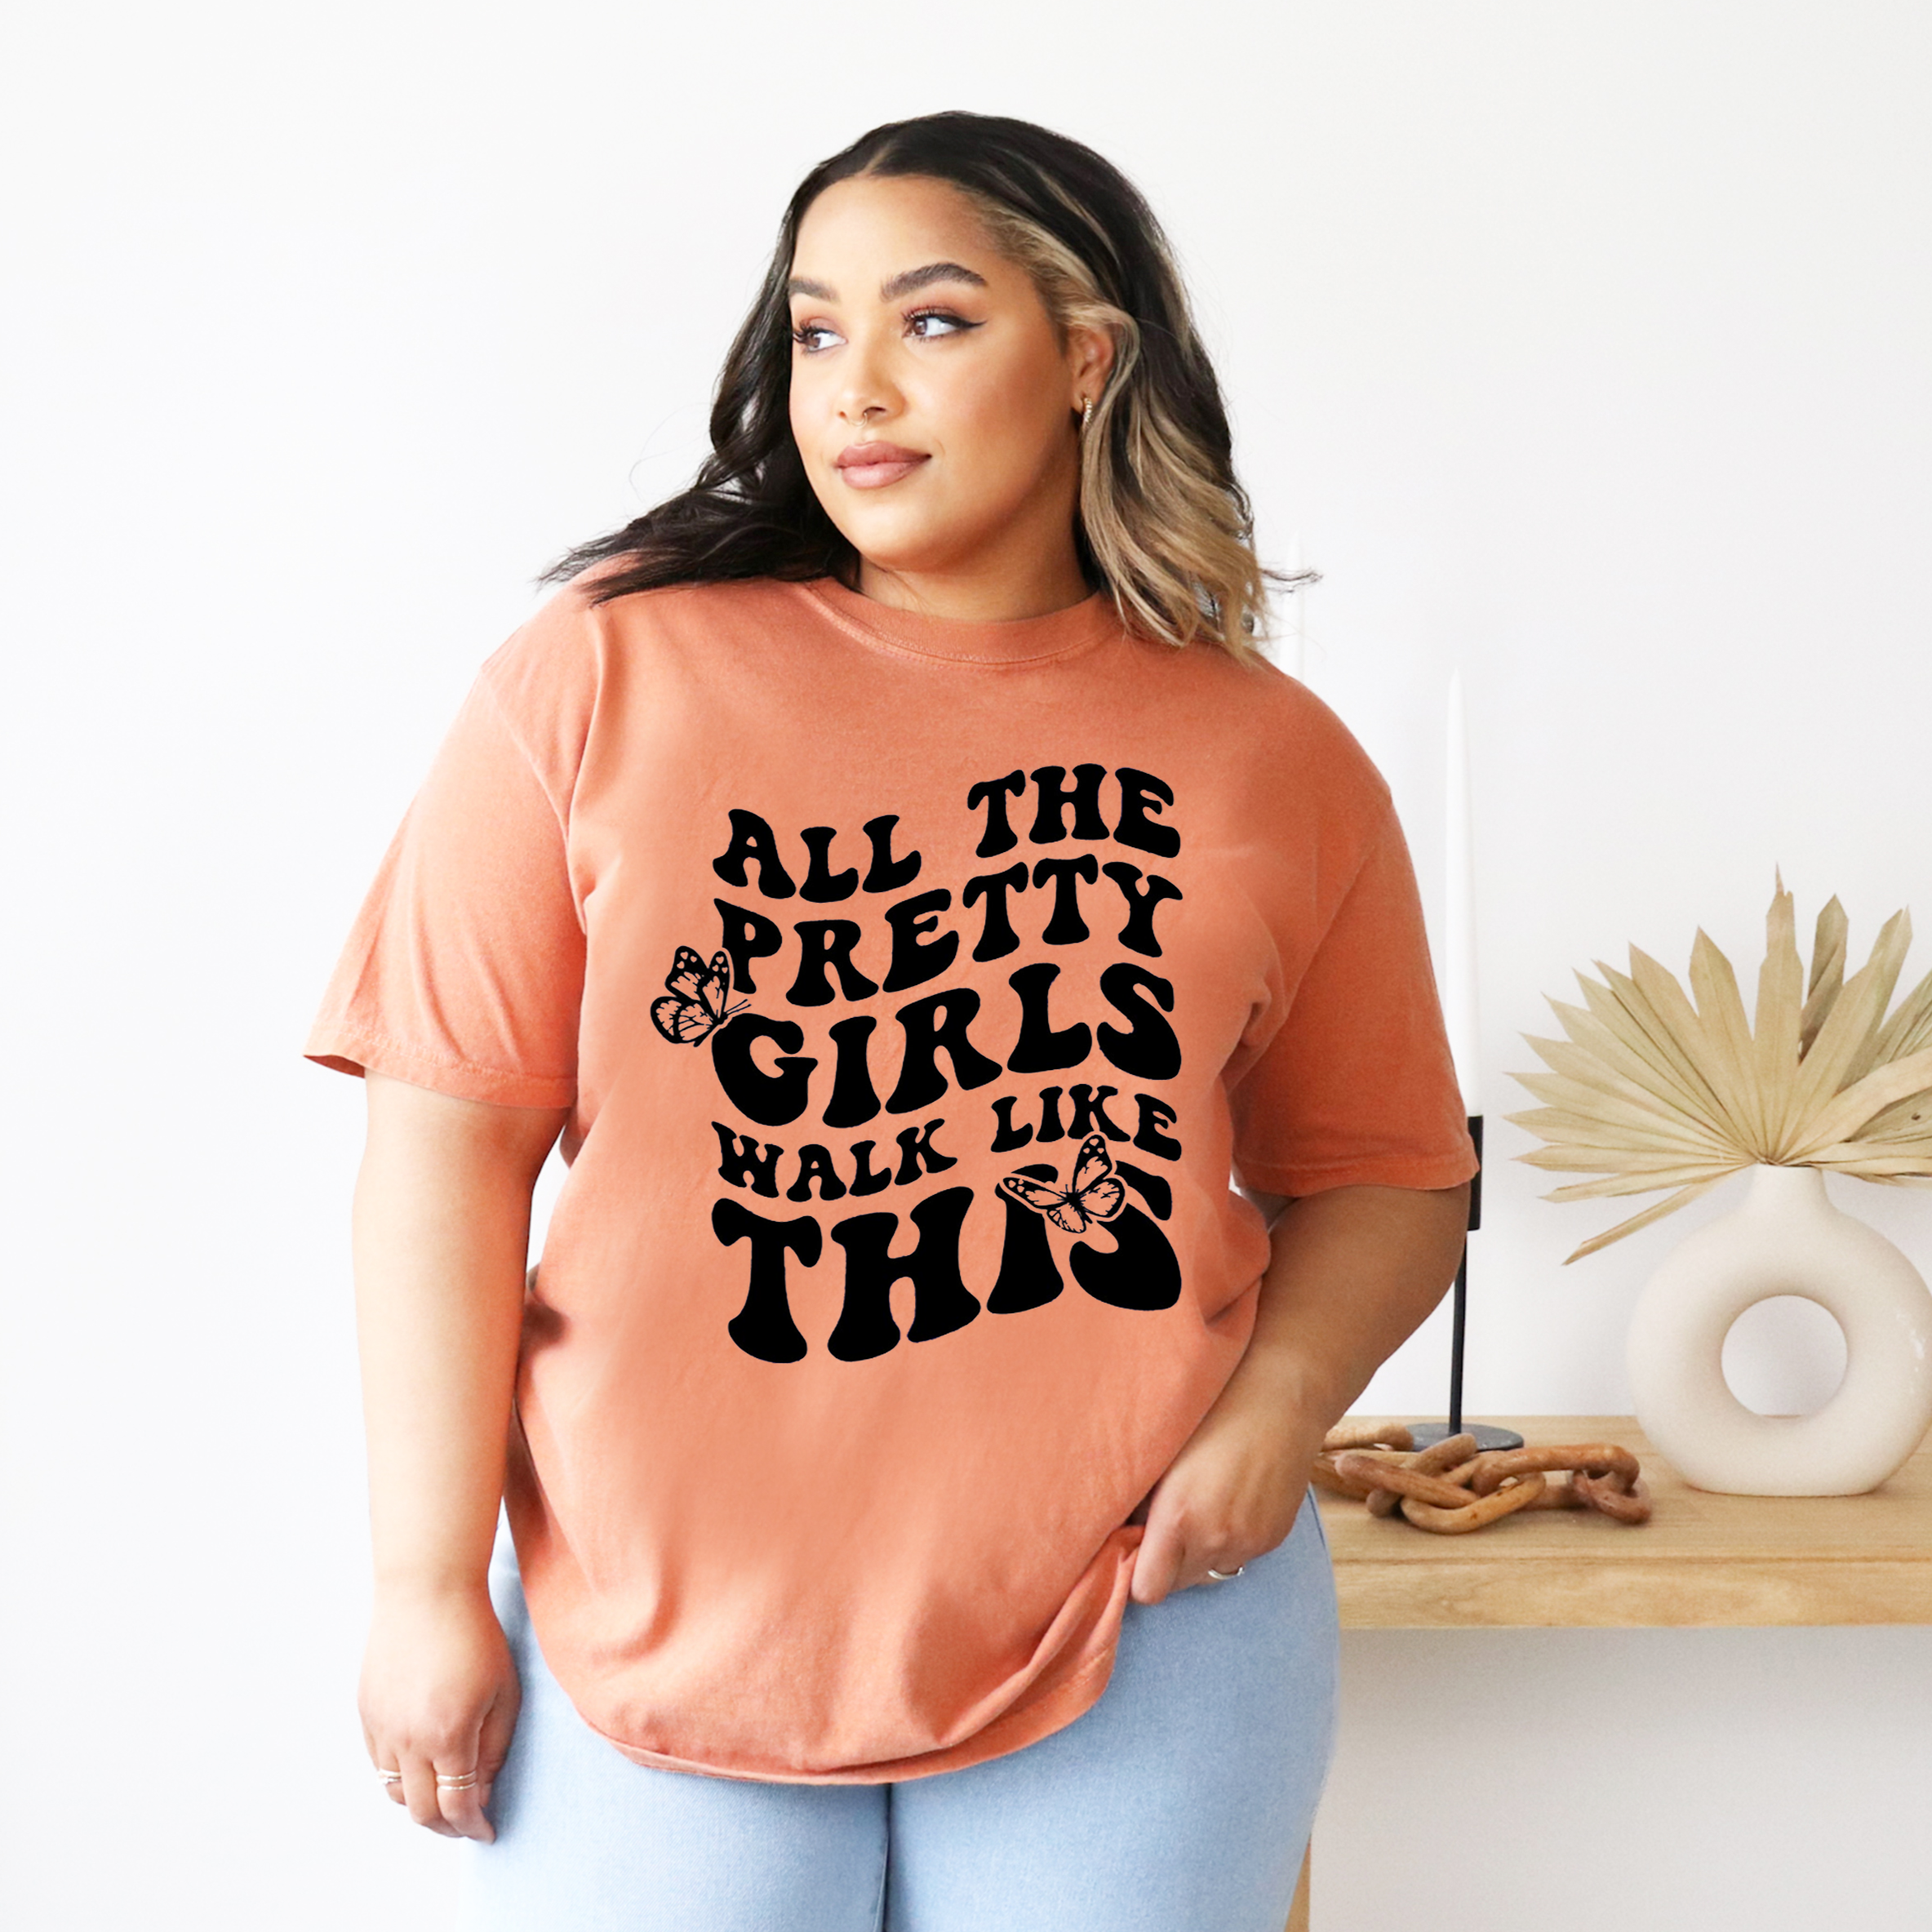 all the pretty girls walk like this motivational inspirational cute girls happy summer happiness body positivity plus size all sizes black women brown women big girls love yourself be proud of who you are soft cotton clothes bright colors 